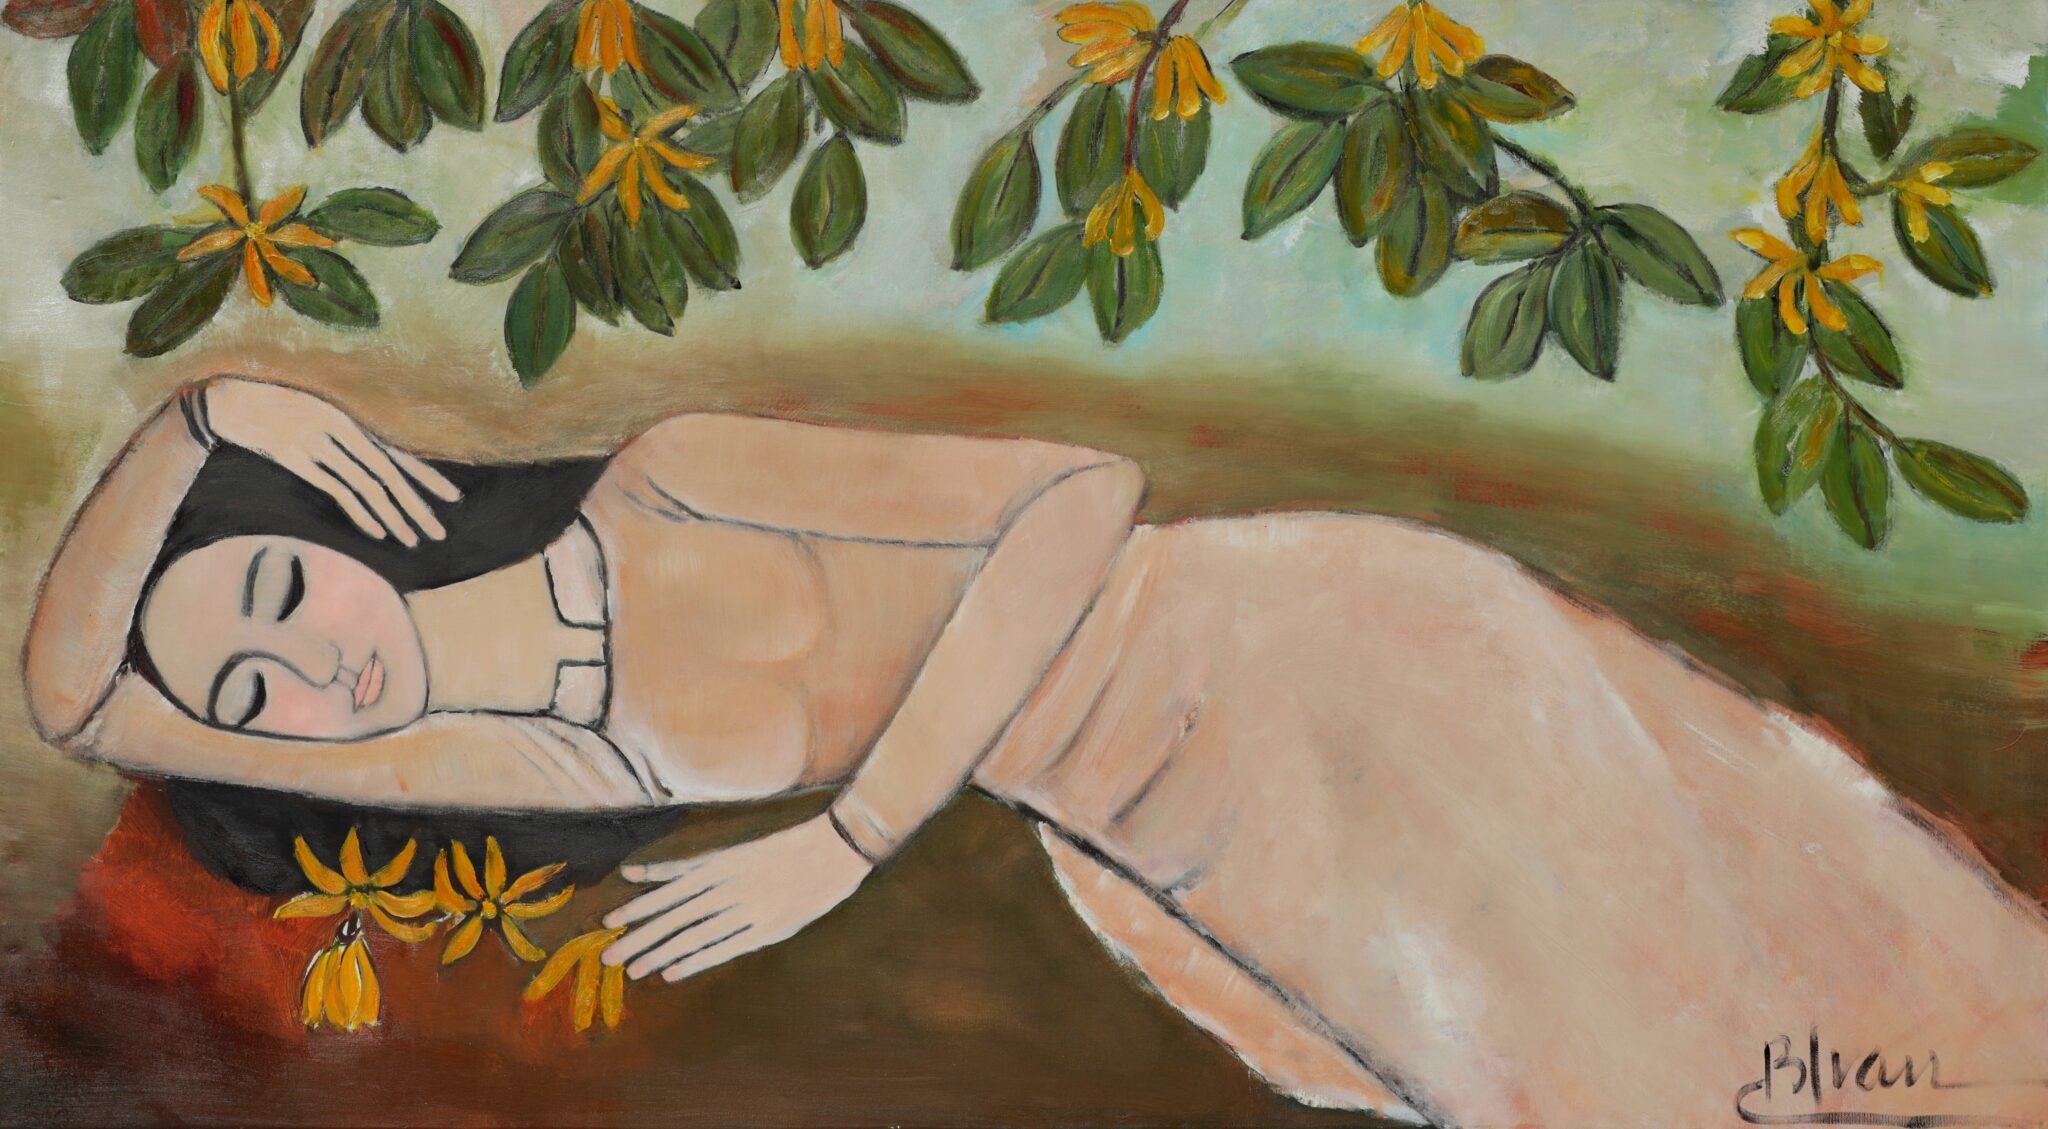 Dreaming | oil on canvas | 72 x 130 cm. (28 11/32 x 51 3/16 in.)